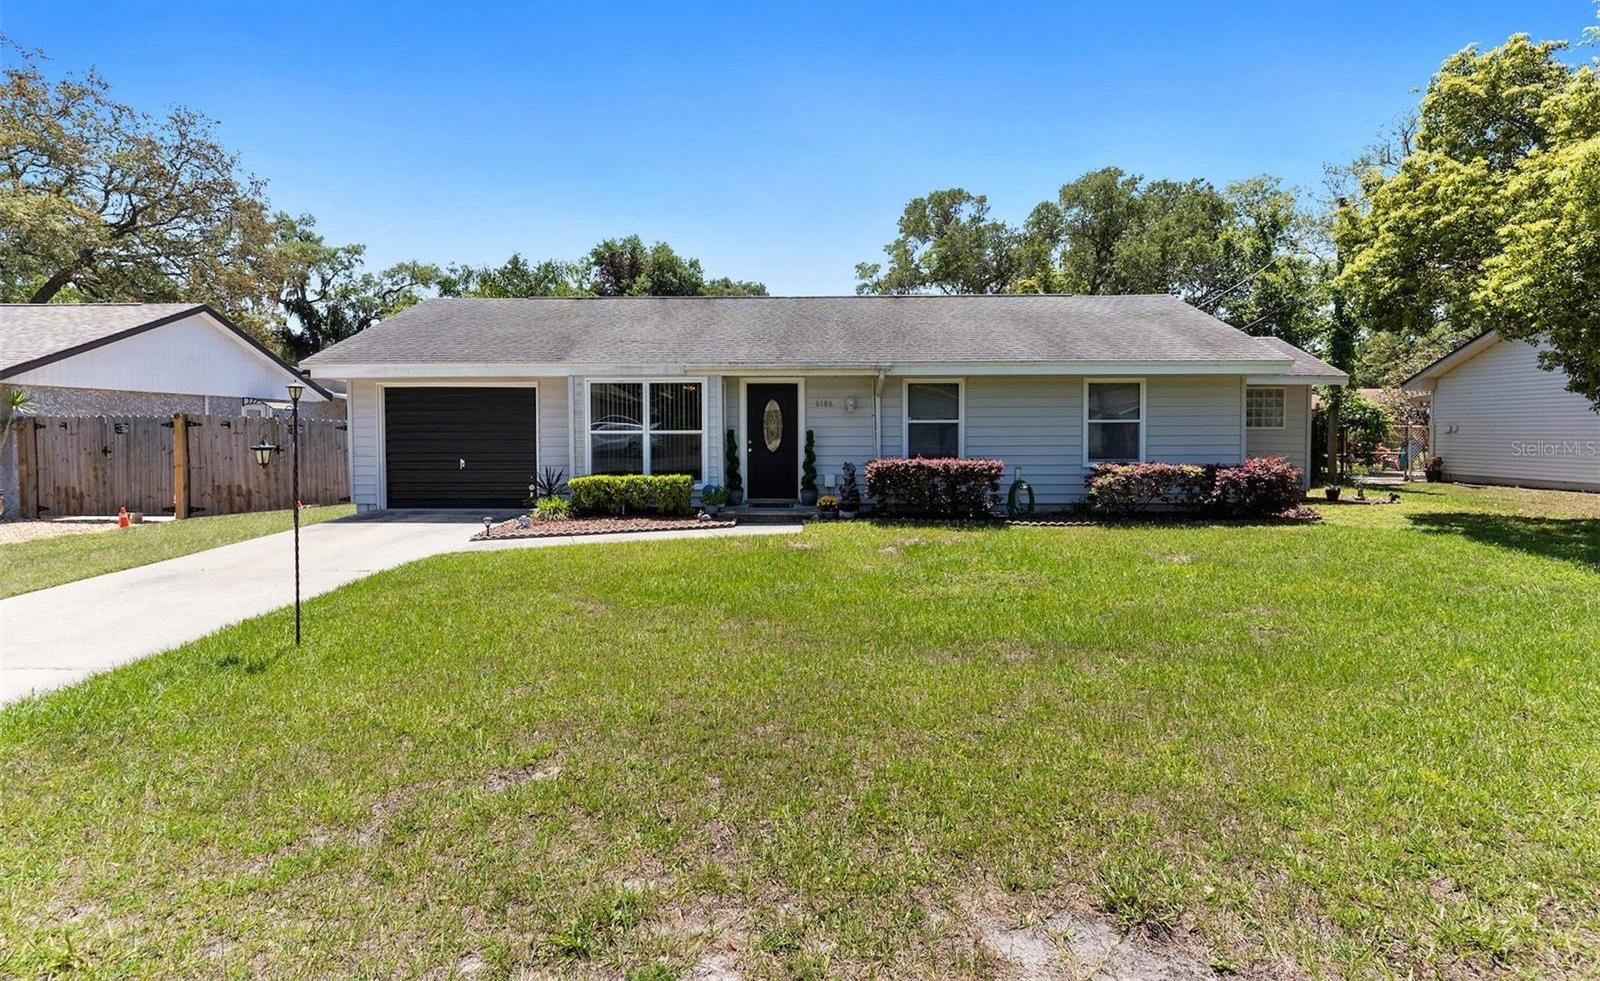 Photo one of 6186 Piedmont Dr Spring Hill FL 34606 | MLS W7864000